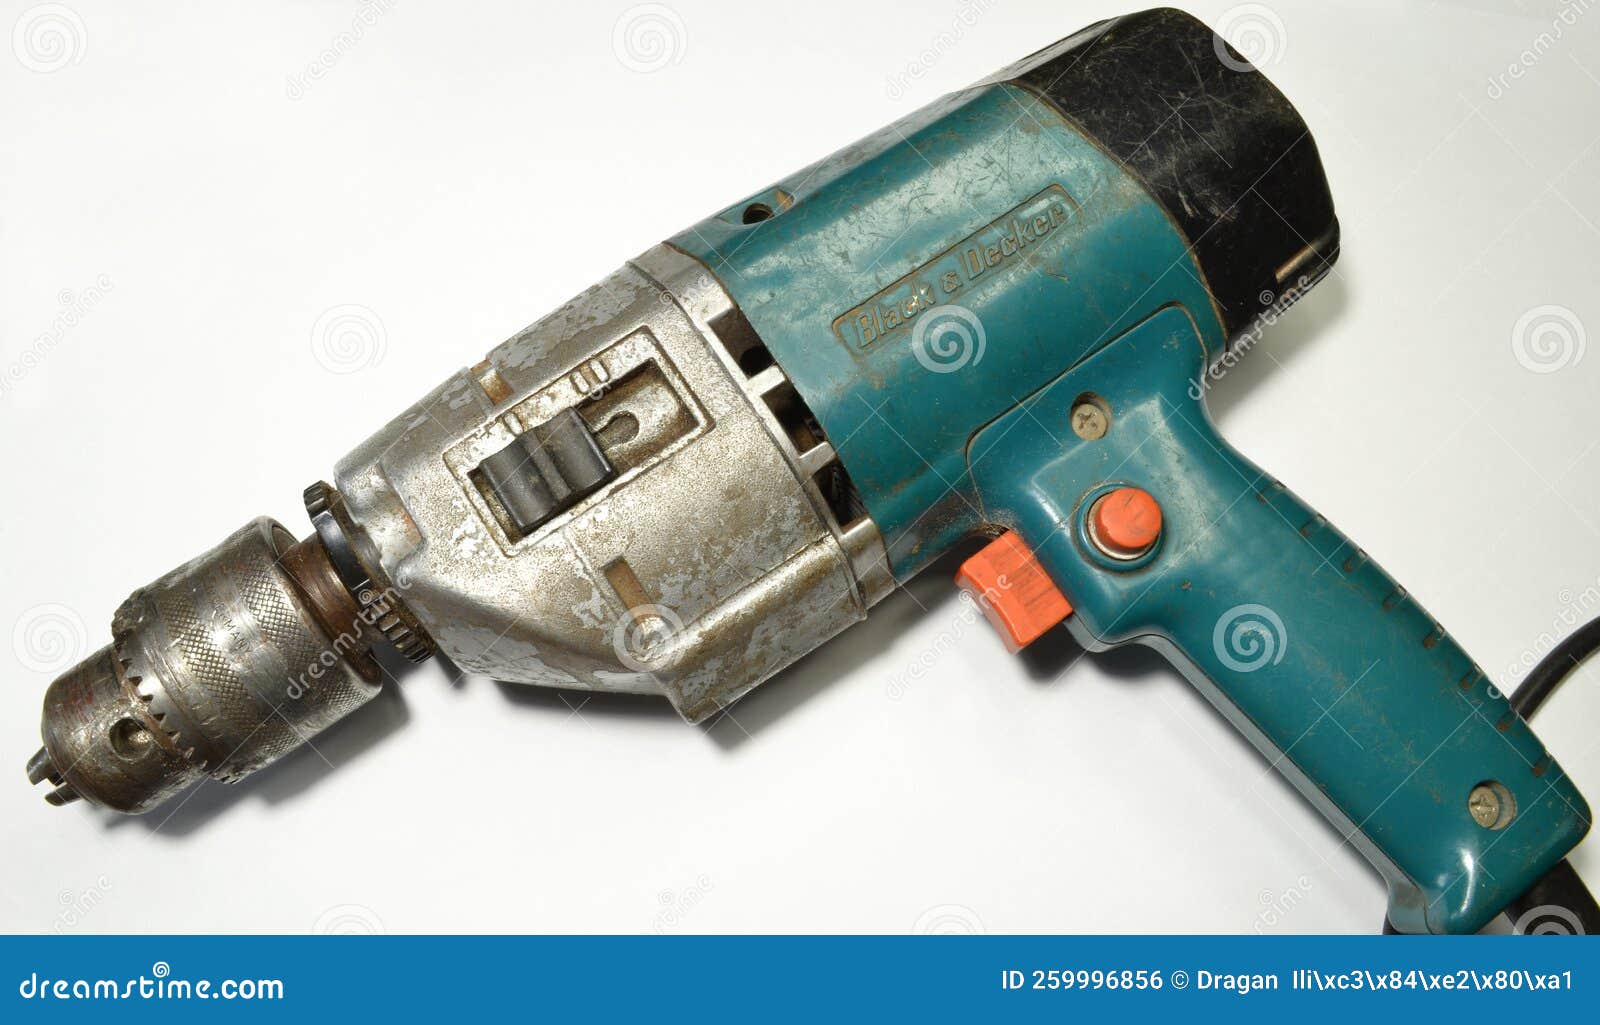 https://thumbs.dreamstime.com/z/used-black-decker-electric-hand-drill-vintage-black-decker-electric-hand-drill-259996856.jpg